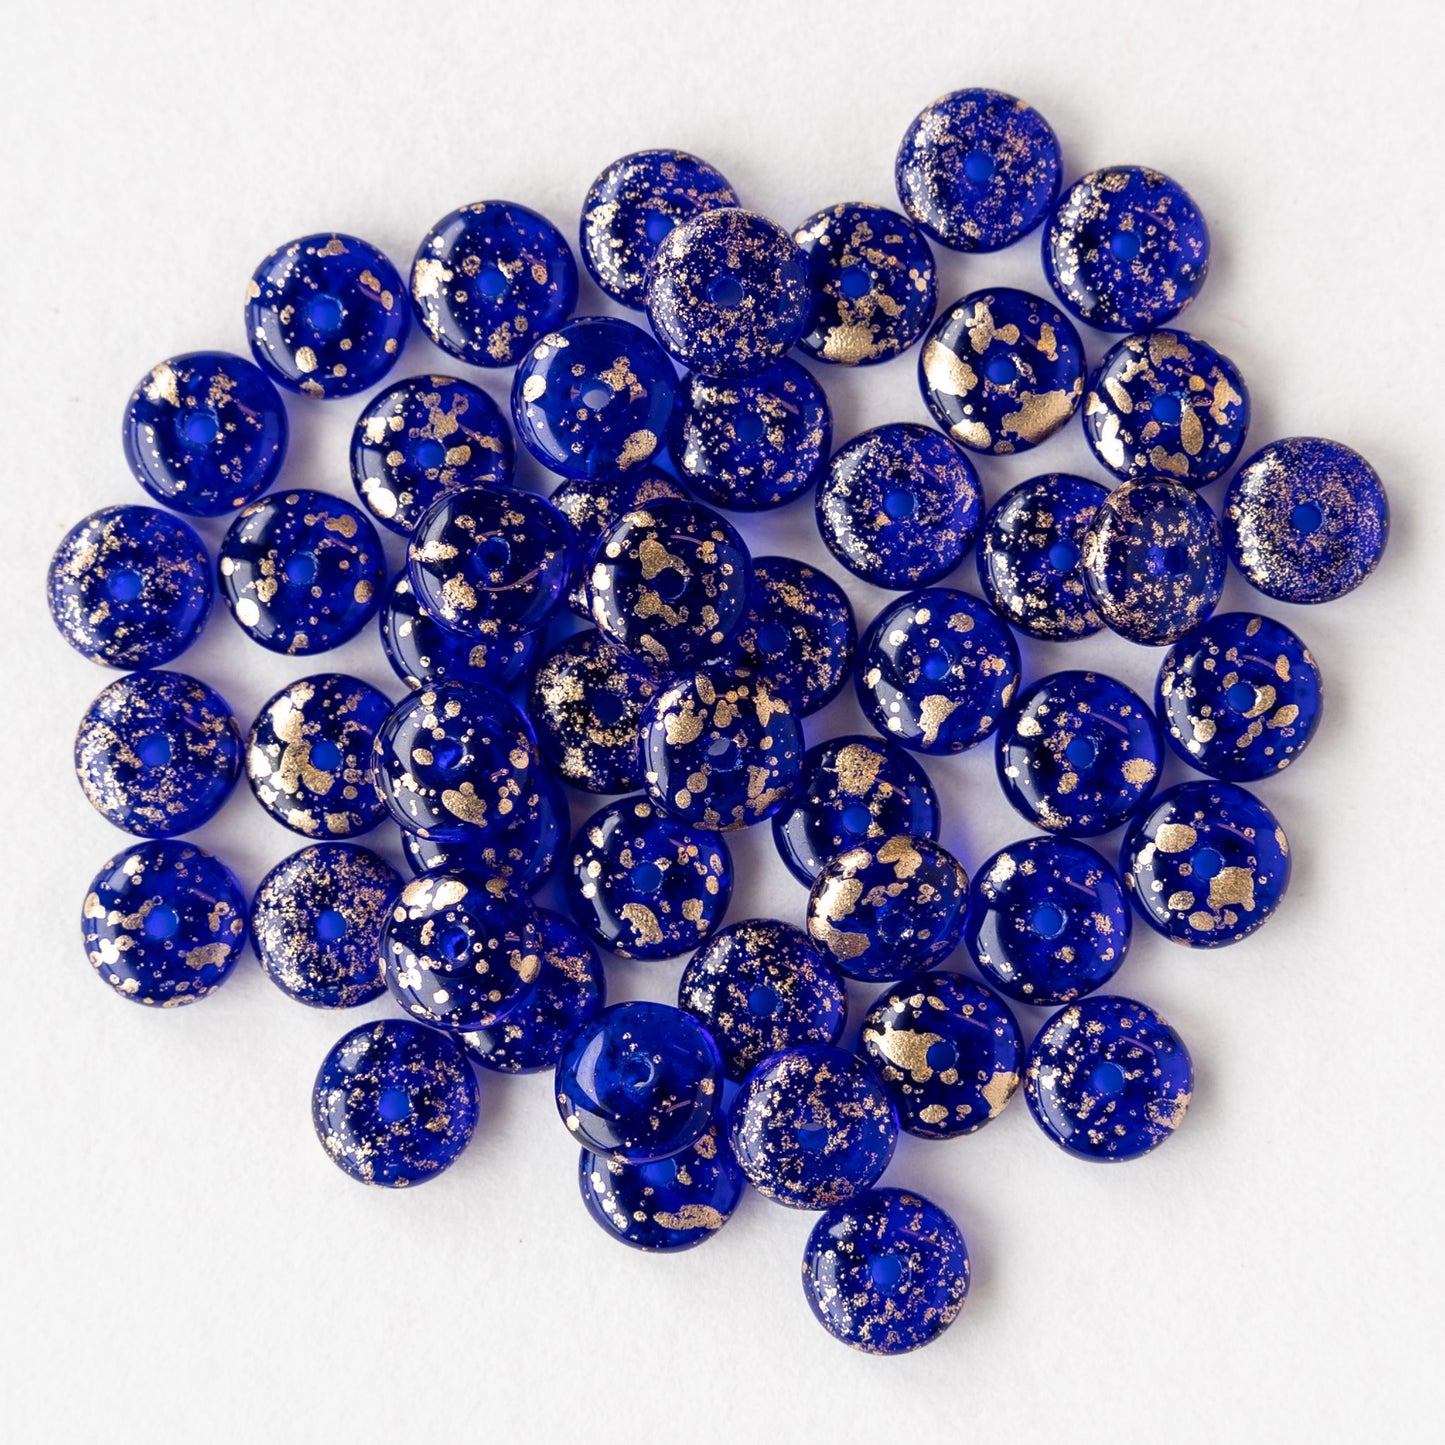 Load image into Gallery viewer, 6mm Rondelle Beads - Cobalt Blue with Gold Dust - 50 Beads
